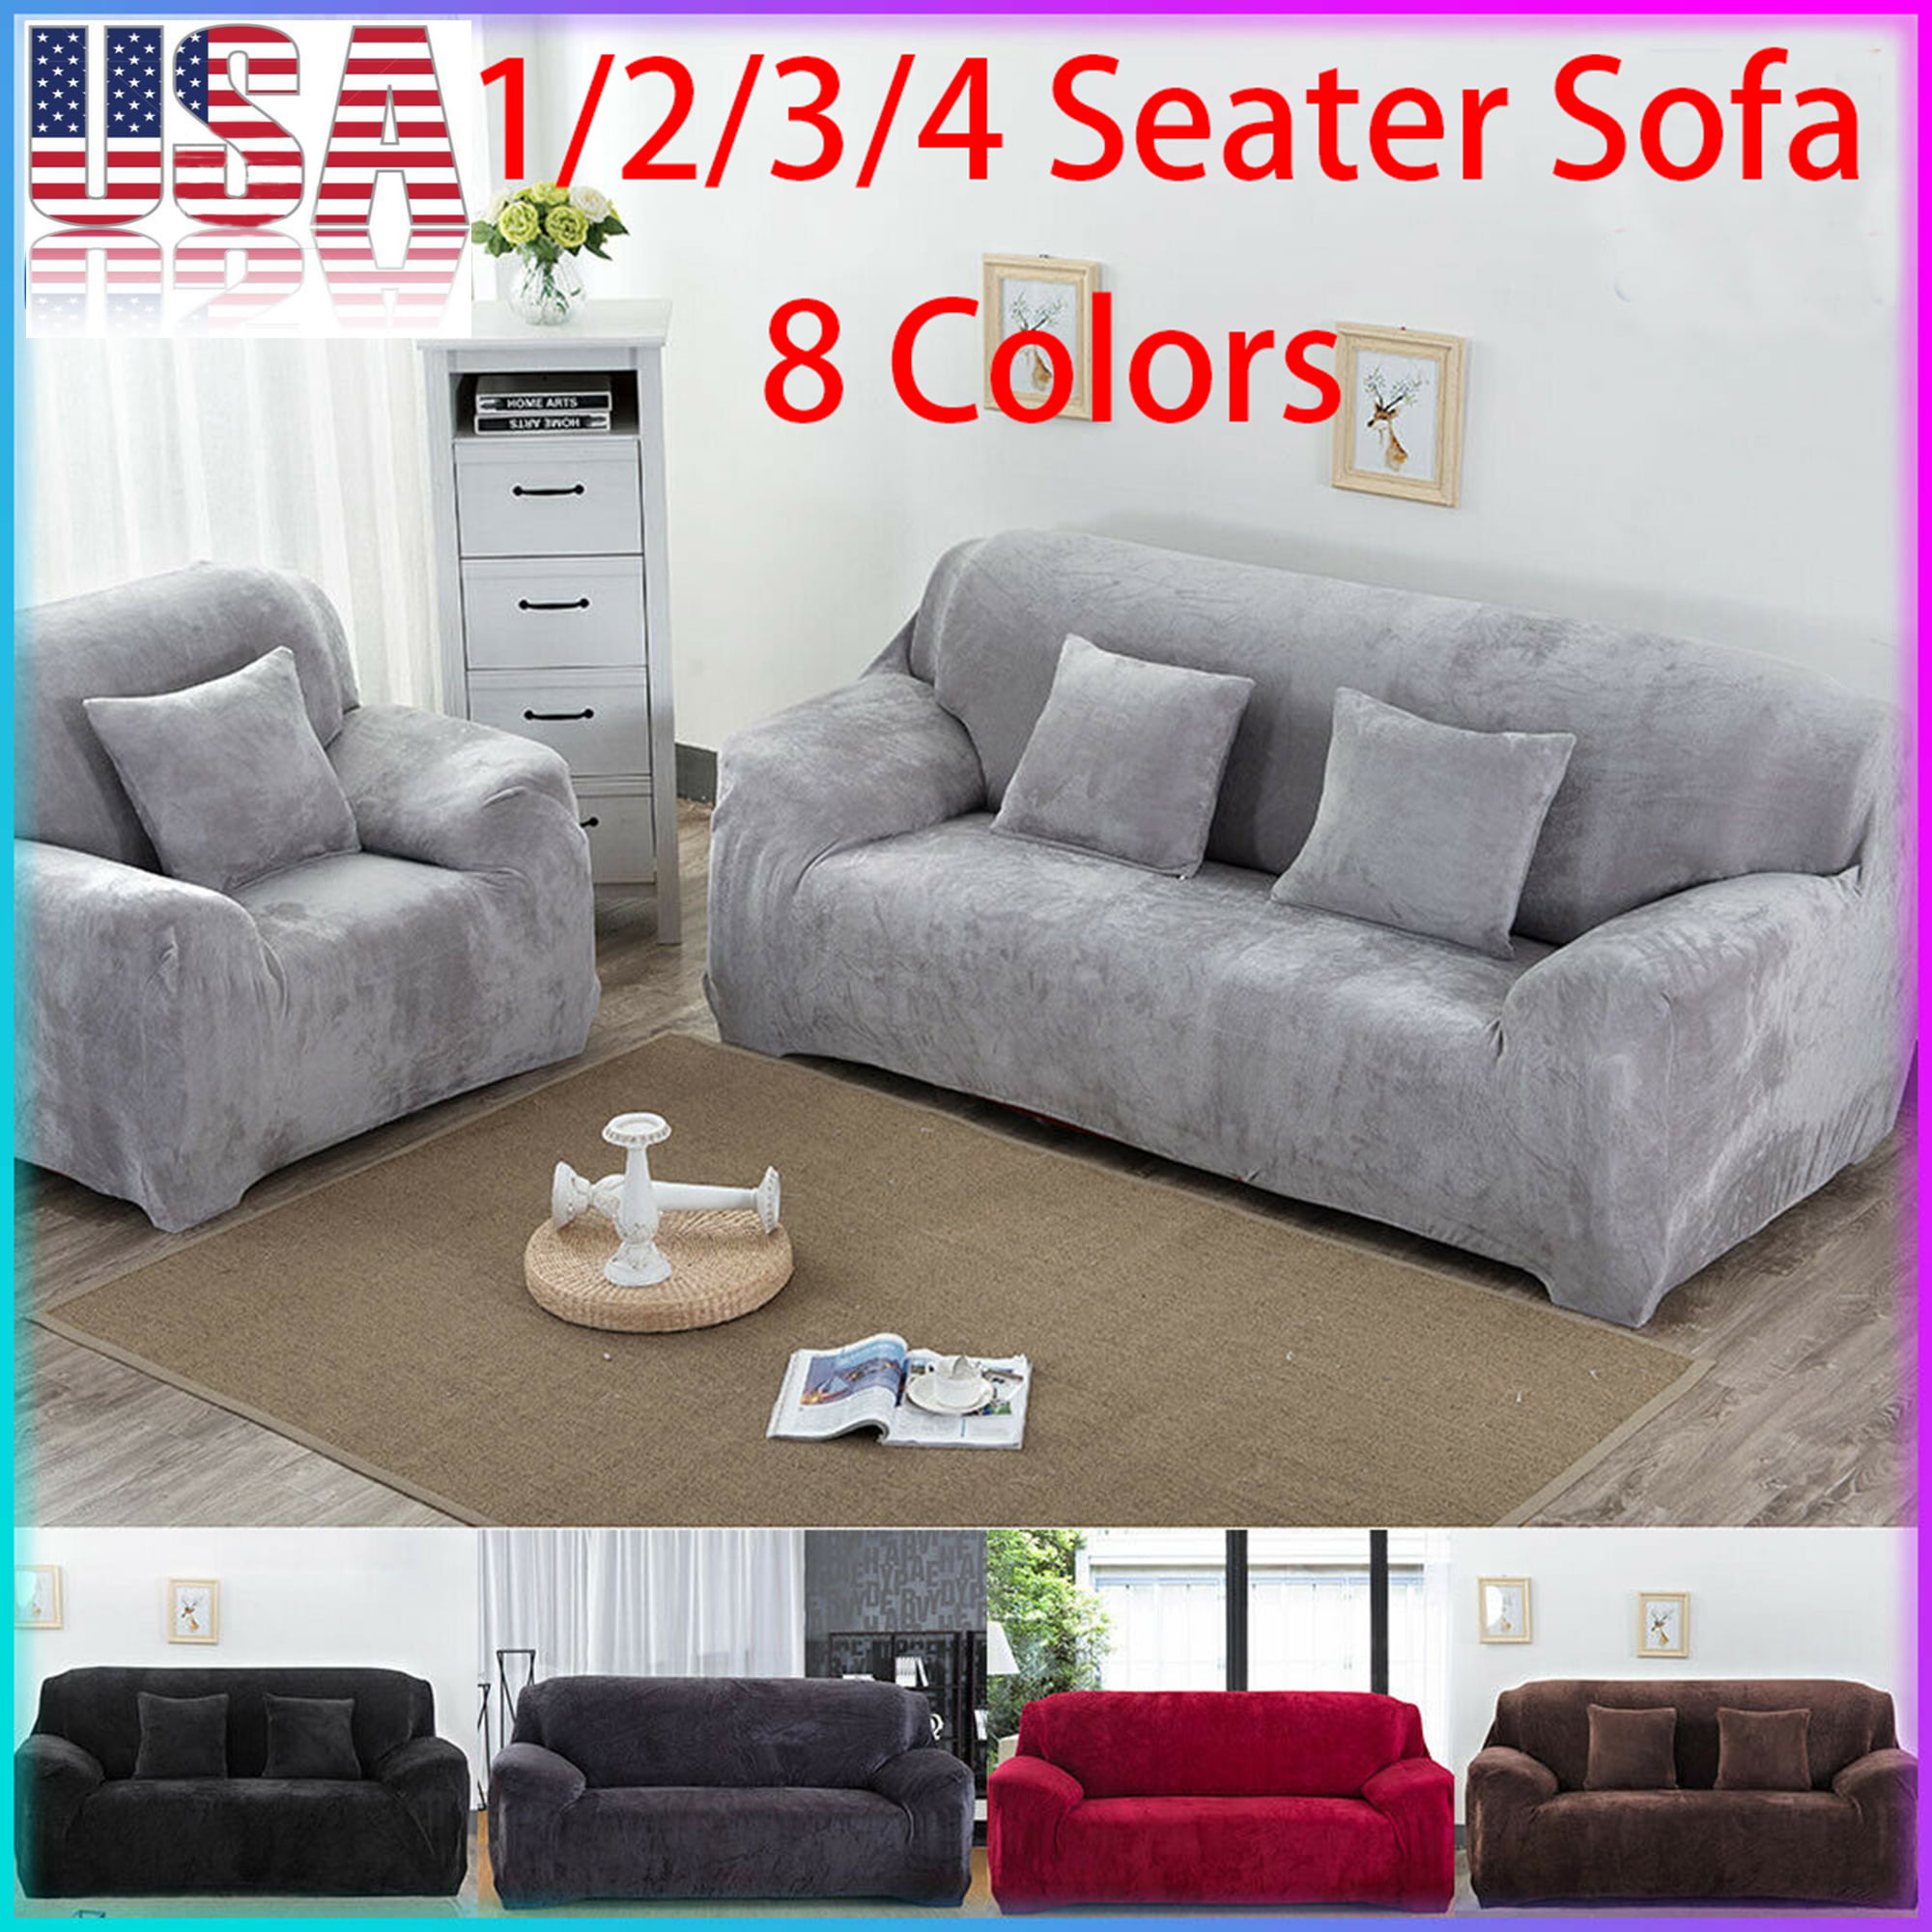 1-4 Seaters Sofa Covers Velvet Thick Plush Stretch Protector Soft Couch Cover 